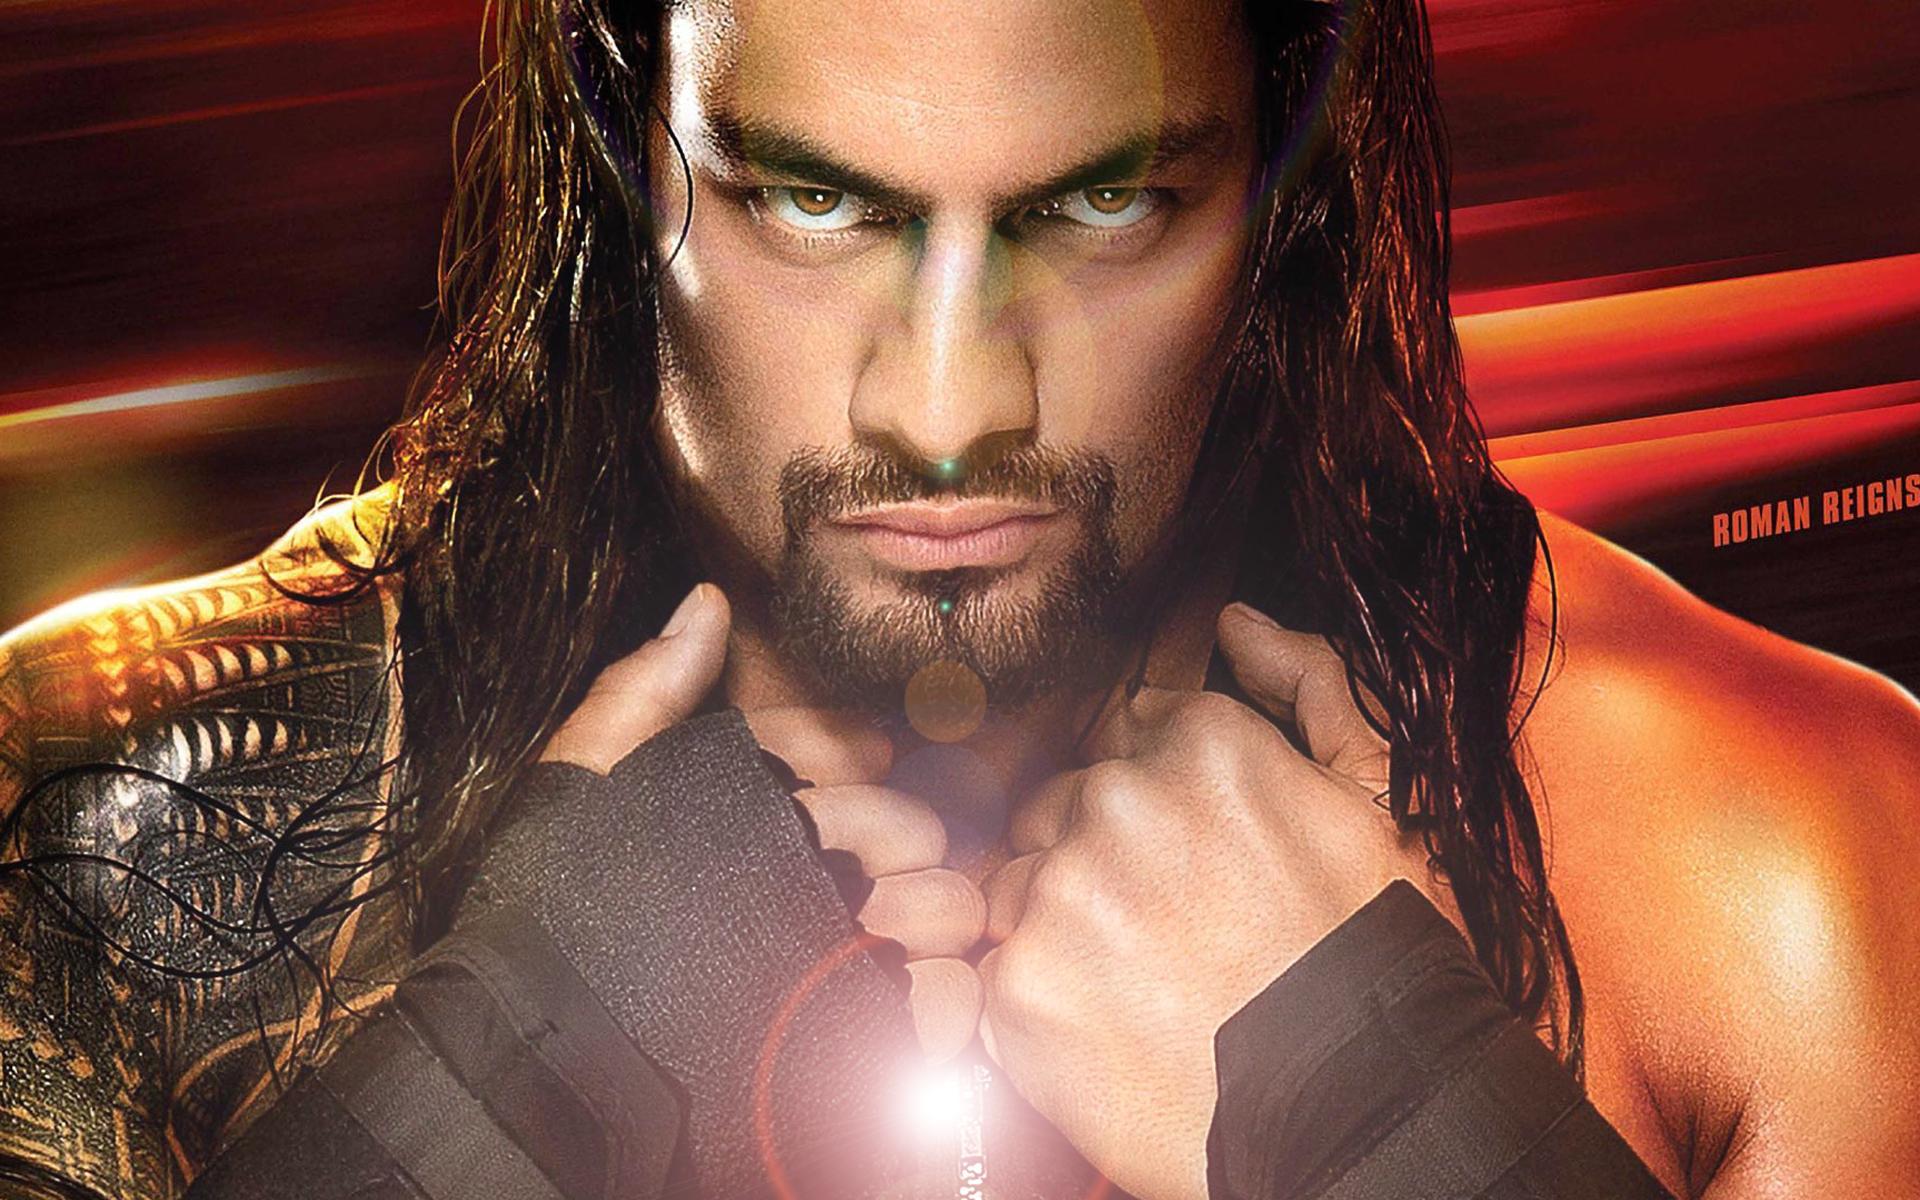 Roman Reigns Tattoo Wallpaper, image collections of wallpaper